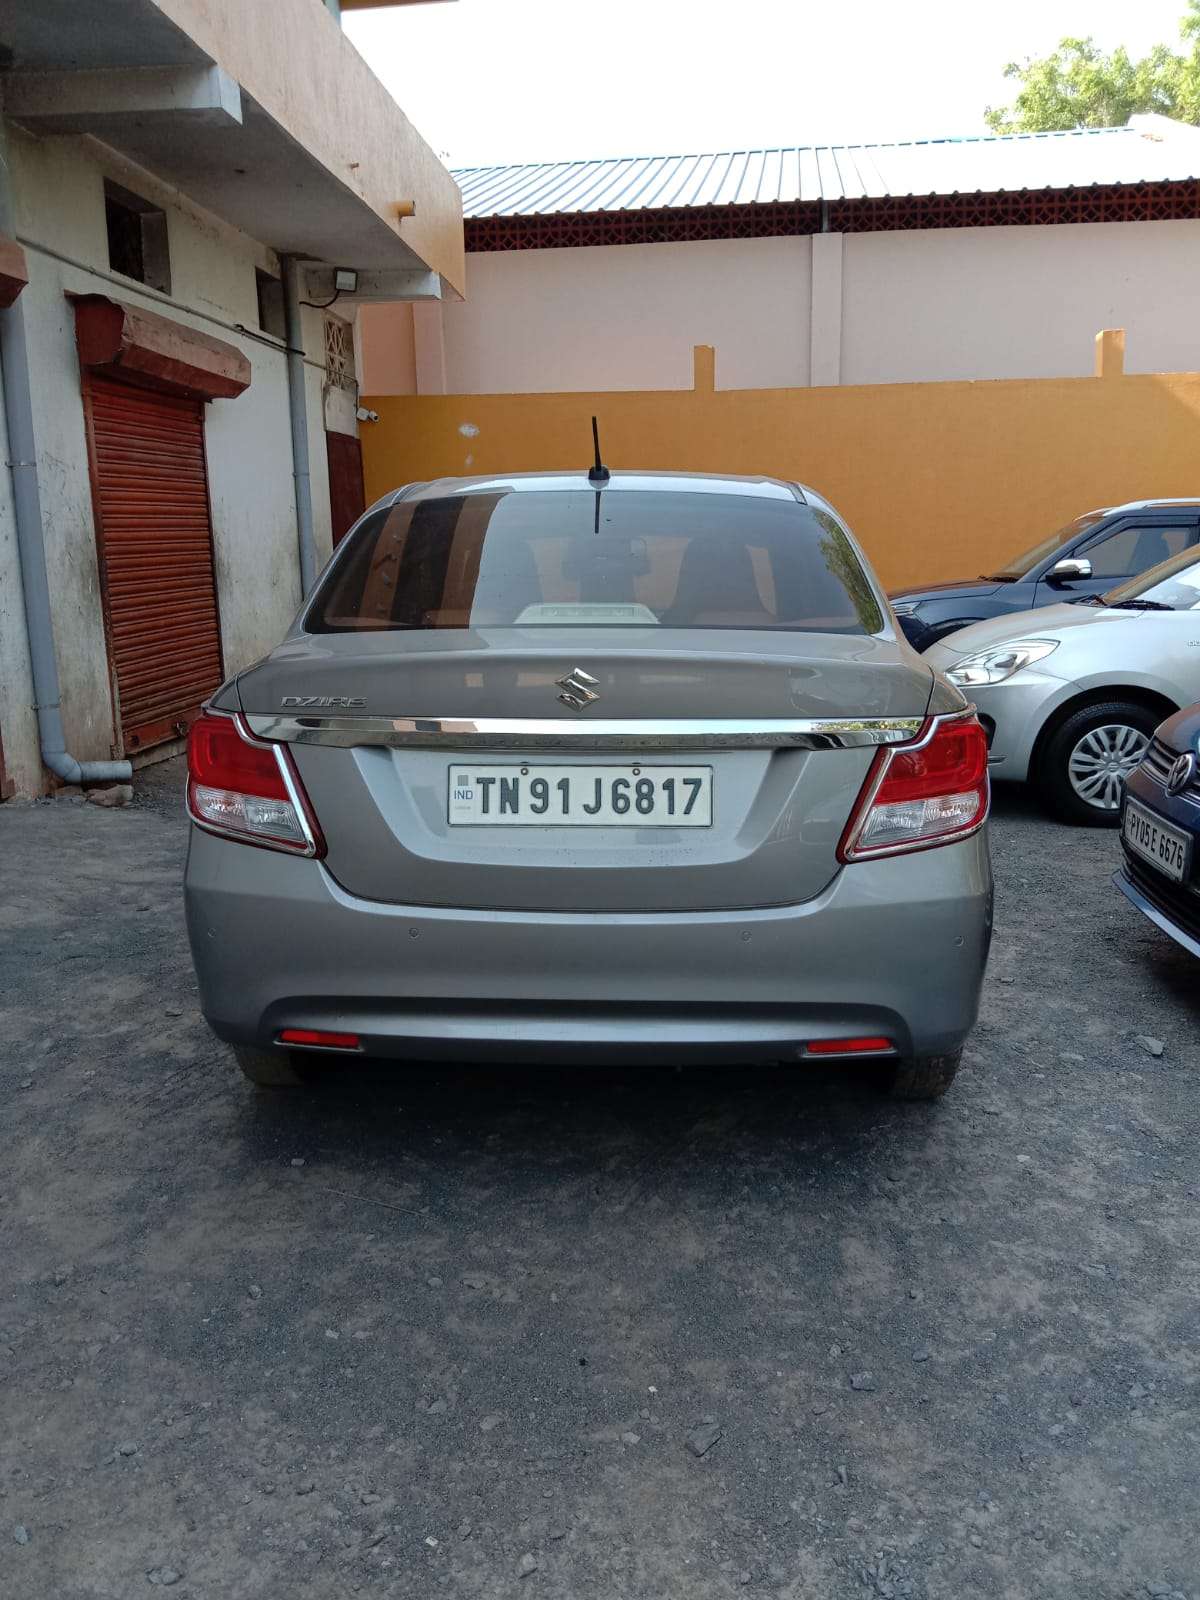 2811-for-sale-Maruthi-Suzuki-DZire-Petrol-First-Owner-2020-TN-registered-rs-630000